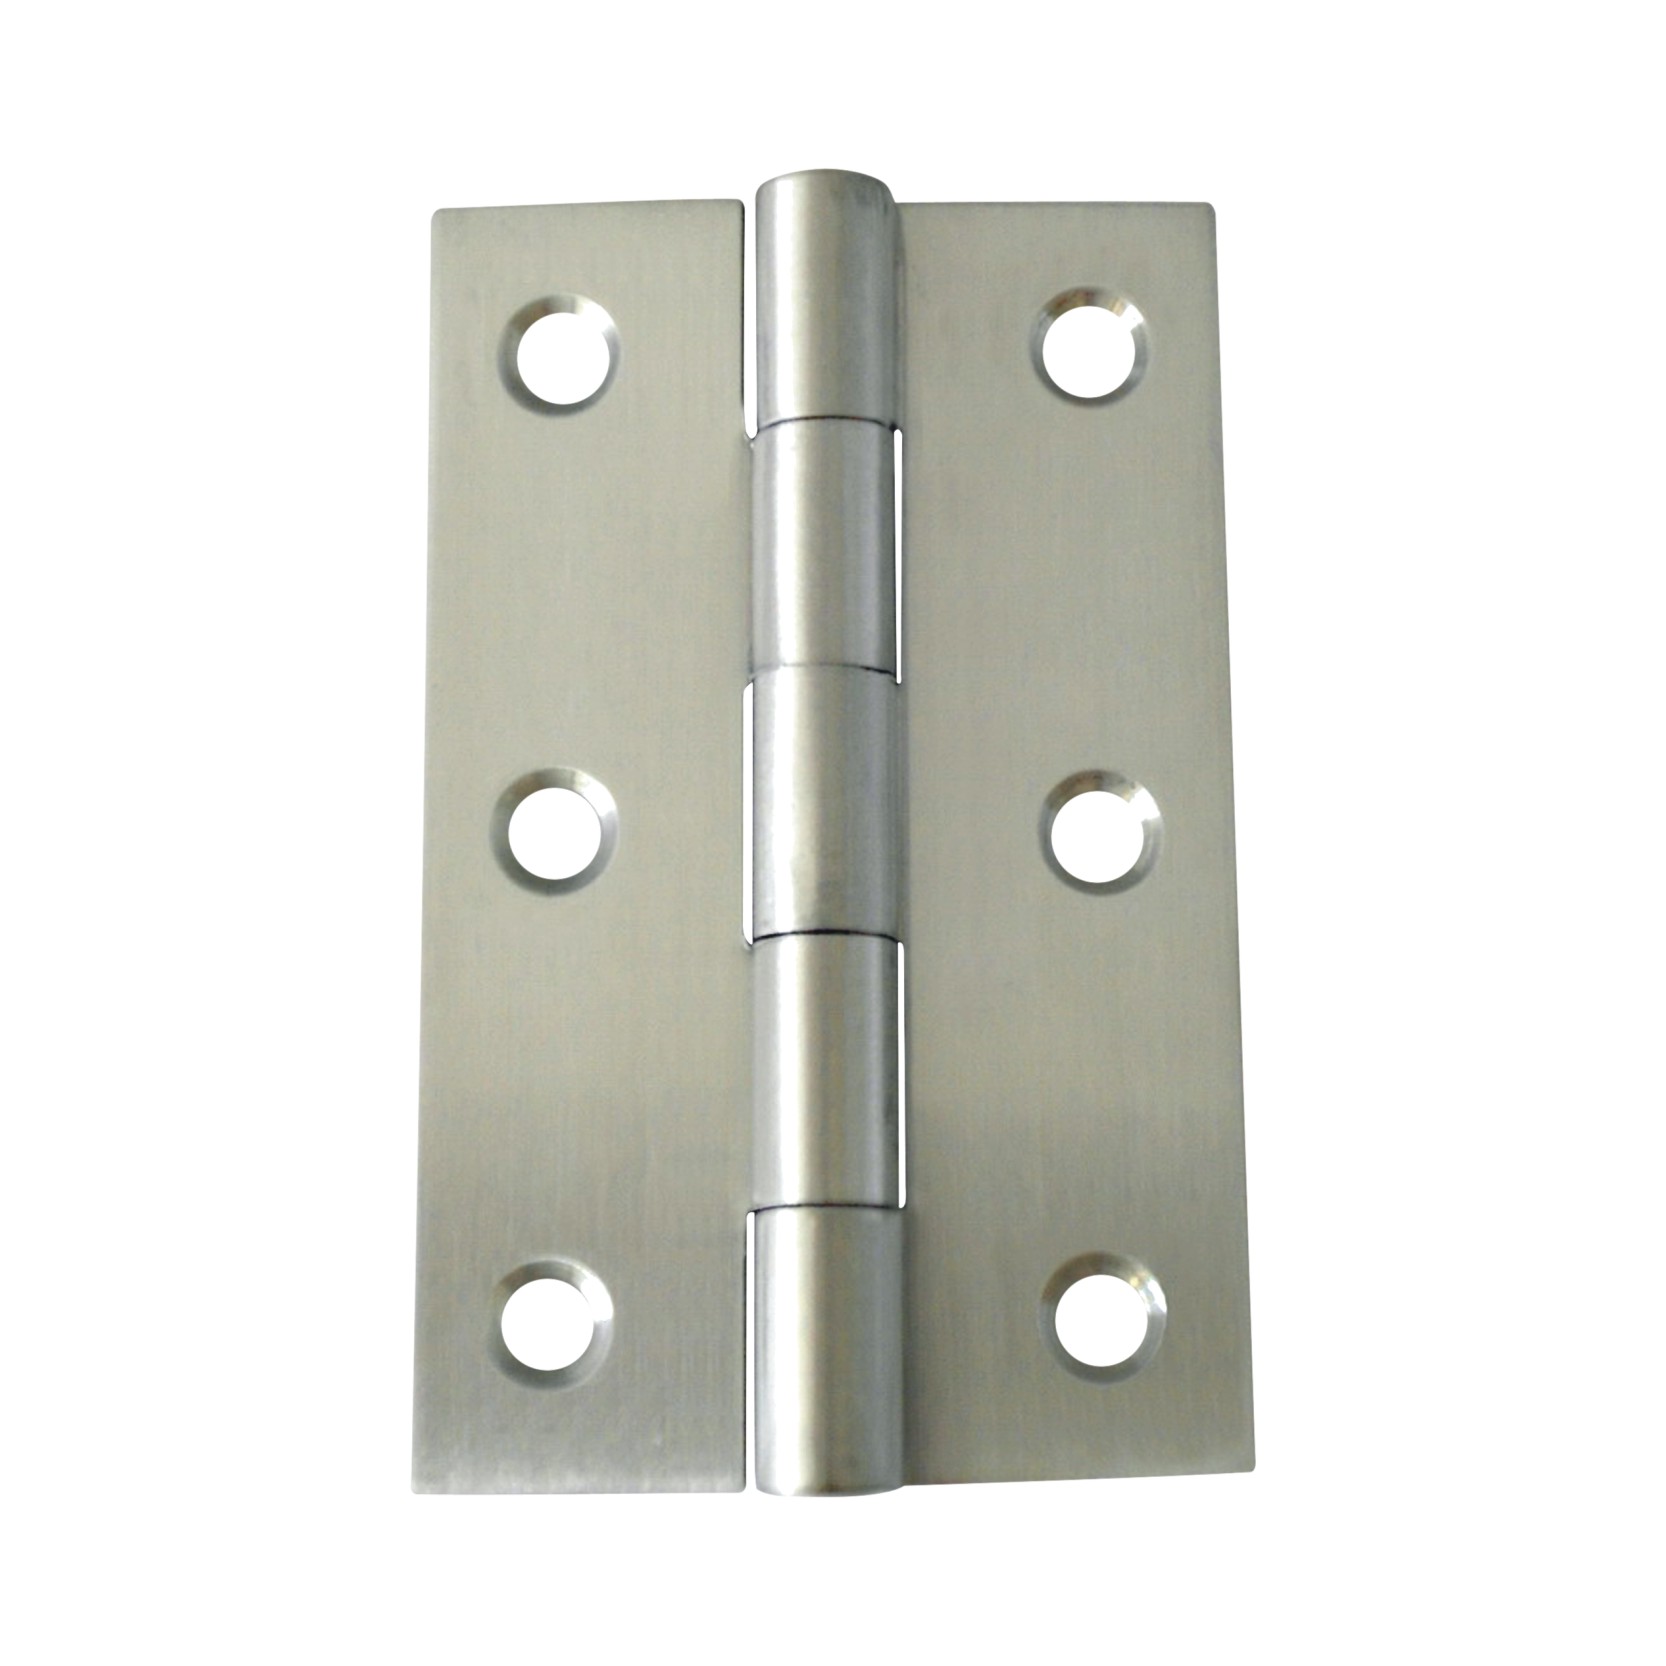 Stainless Steel Butt Hinge -:75x41x1.5mm